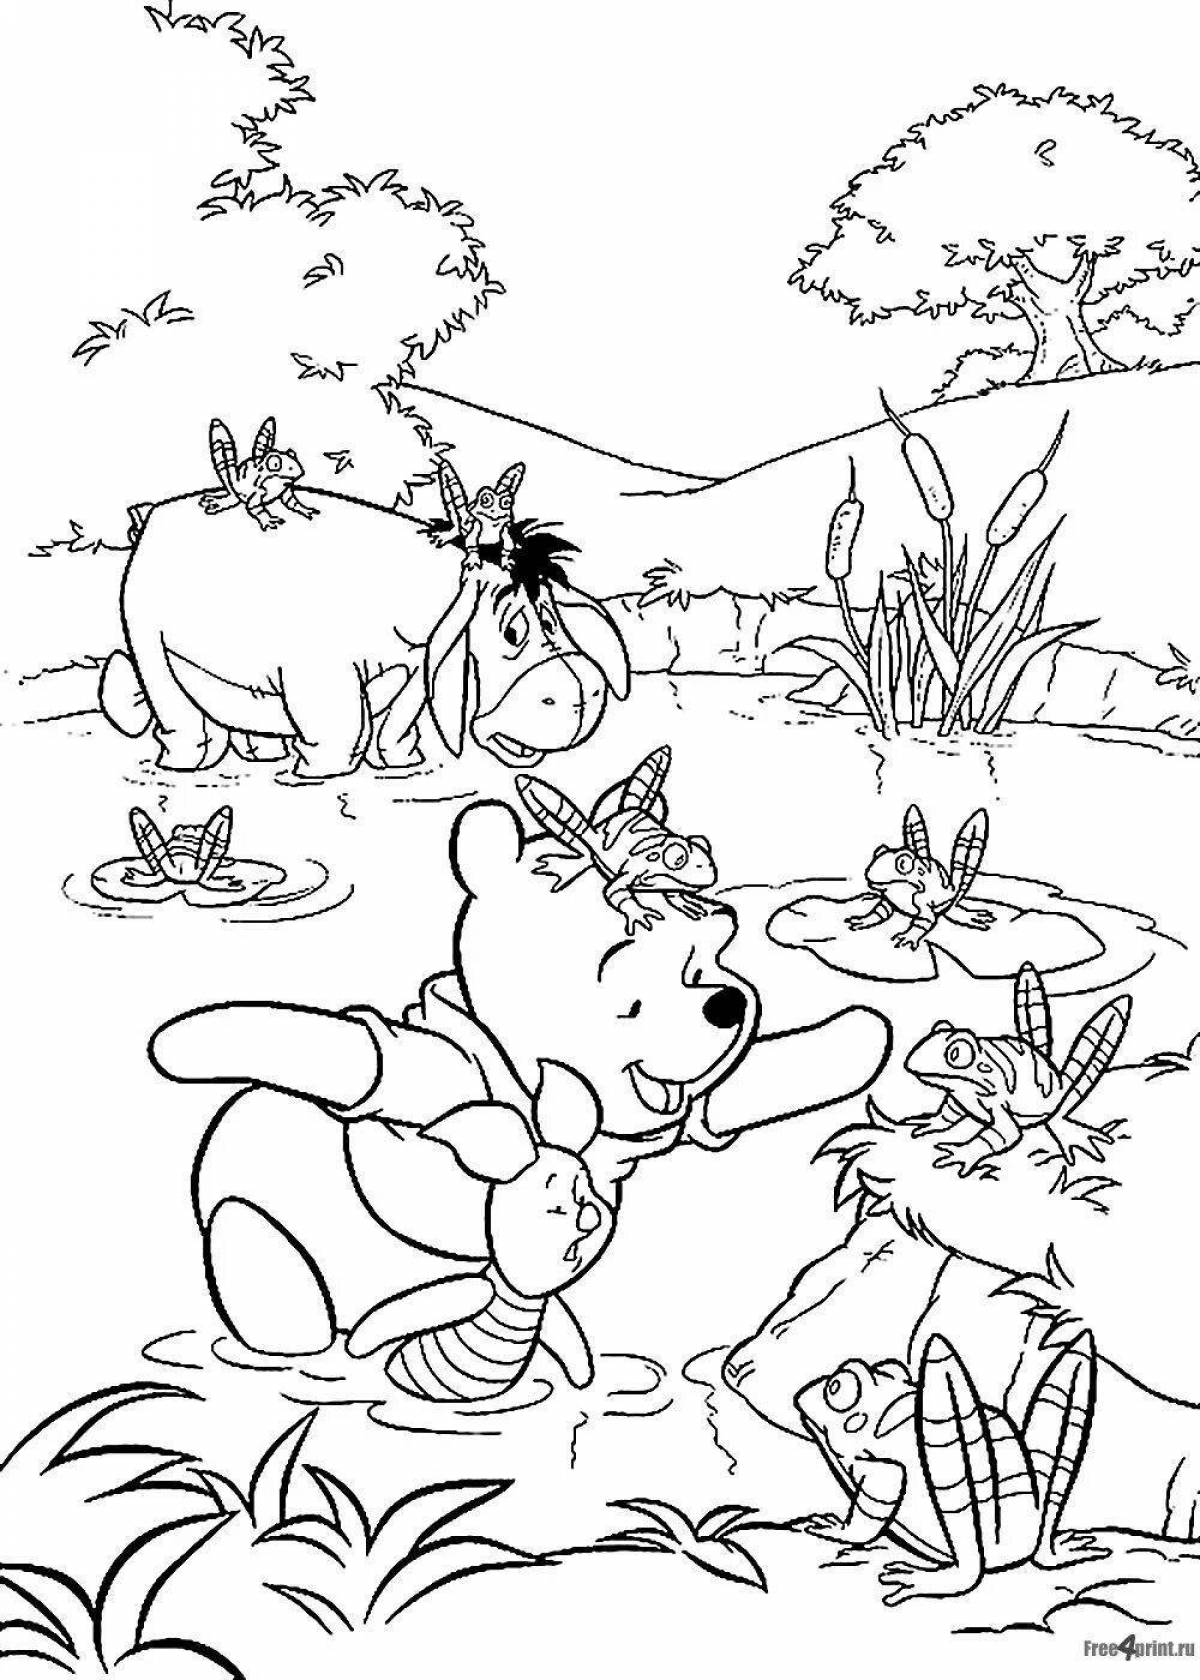 Coloring page nice winnie the pooh and his friends